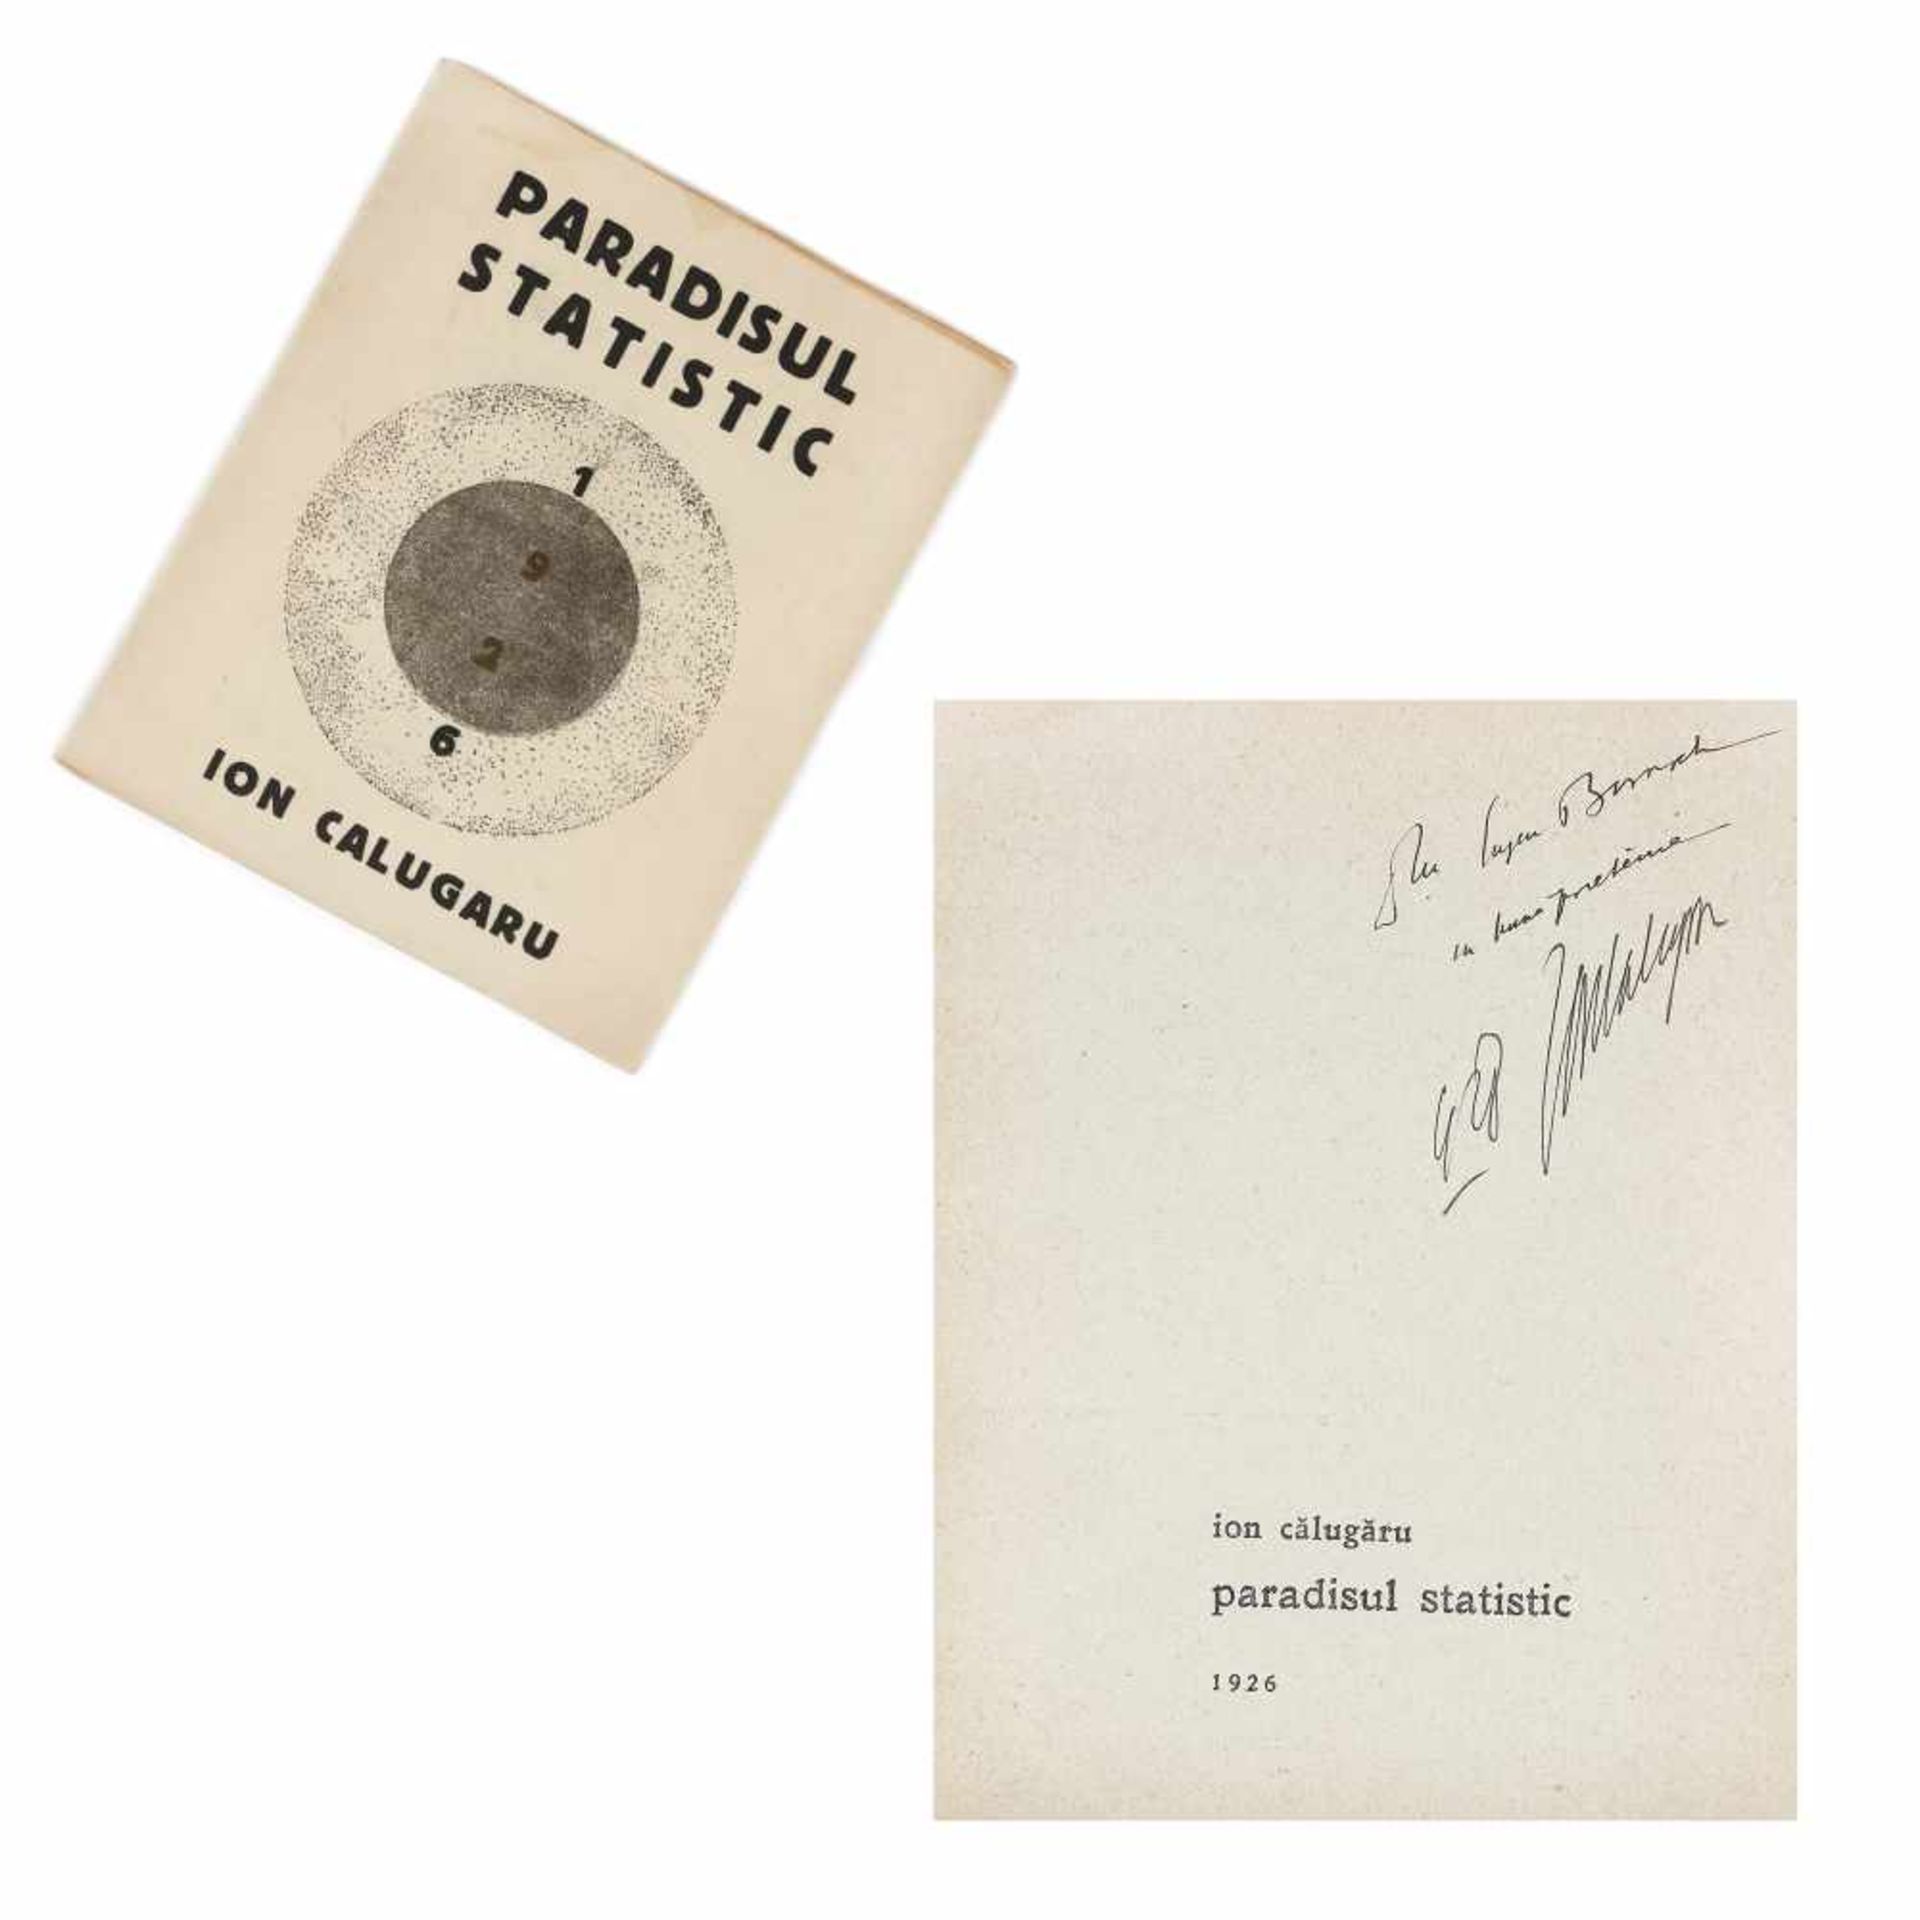 "Paradisul statistic" ("Statistical Paradise"), by Ion Călugăru, Bucharest, 1926, with drawings by